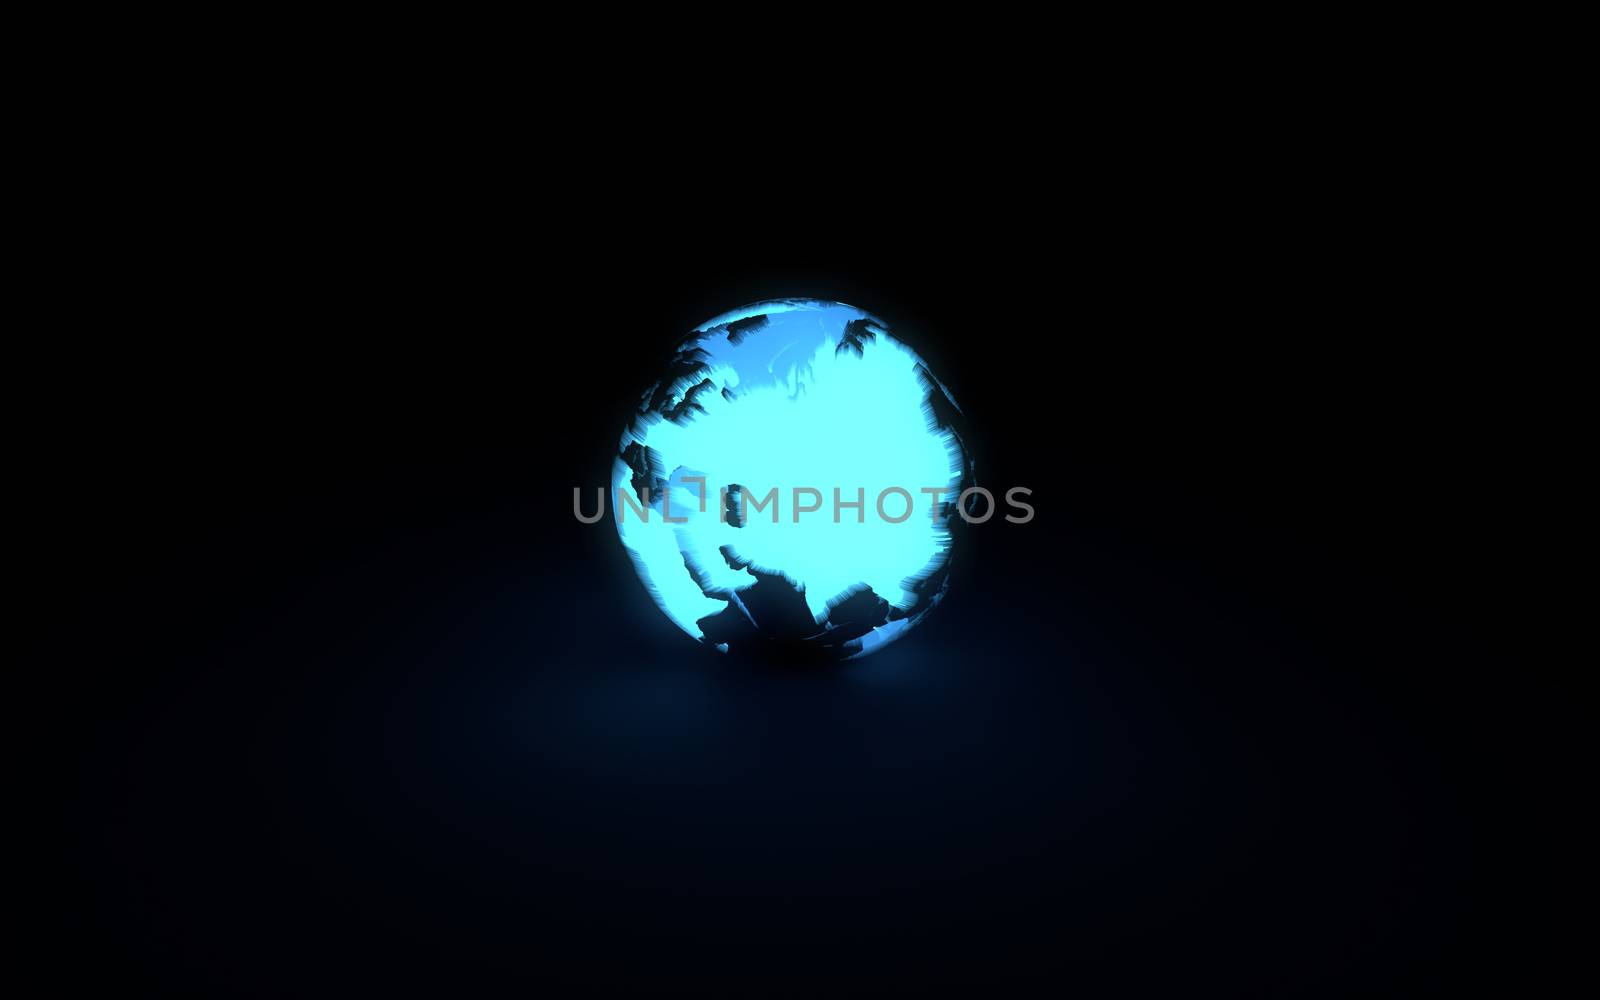 Abstract 3d model of blue glowing earth globe on black background. Front Eurasian continent